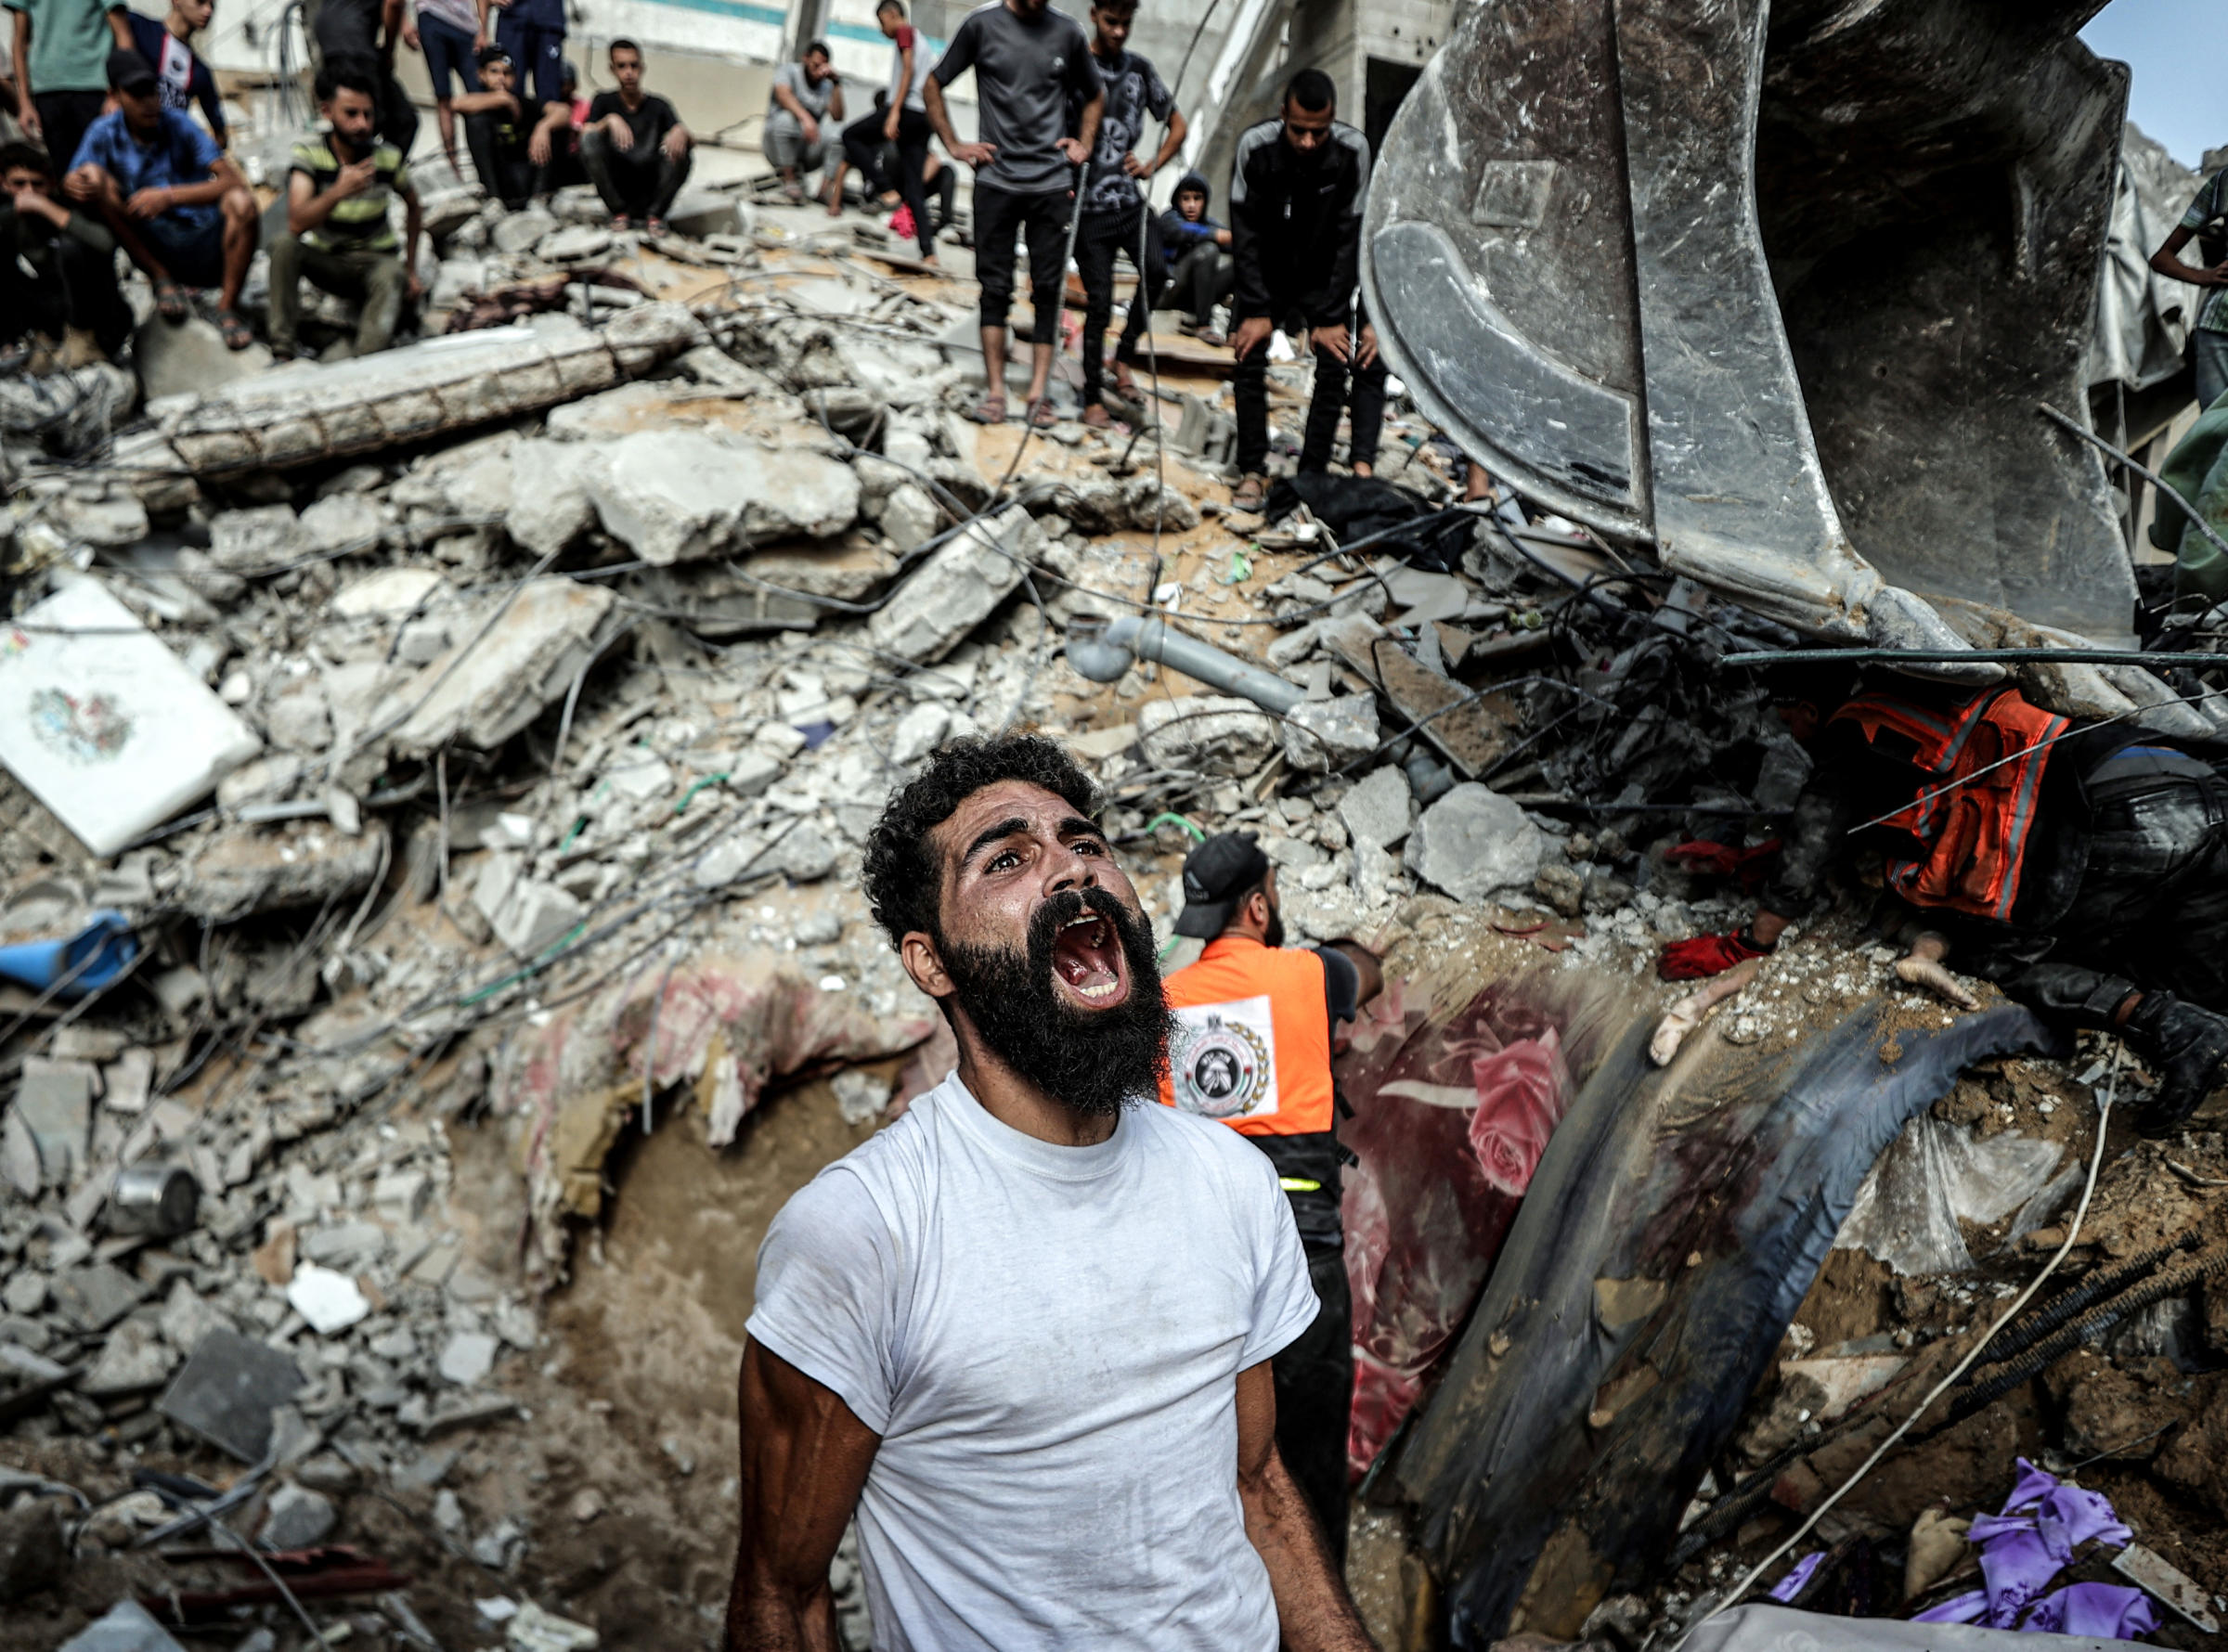 A man yells out as rescue teams search the debris of a building following an Israeli airstrike in Gaza City.